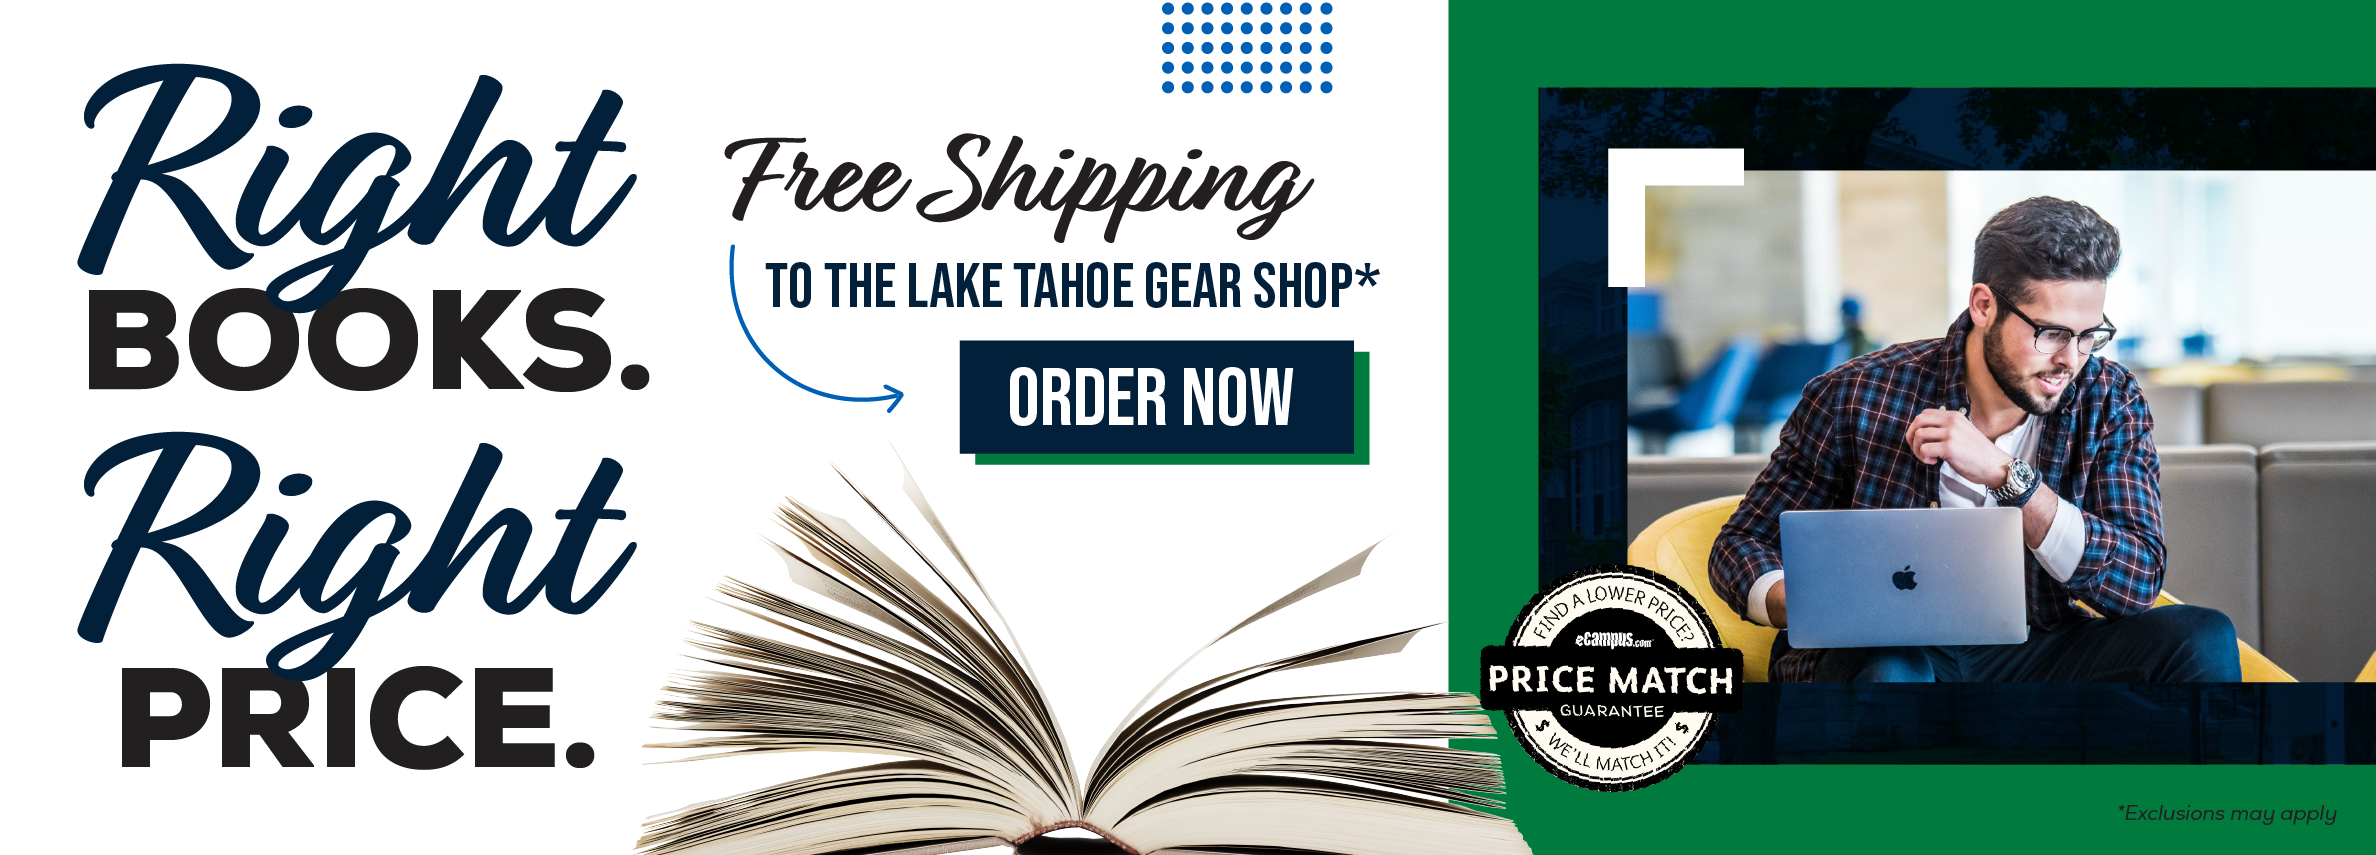 Right books. Right price. Free shipping to the Lake Tahoe Gear Shop.* Order now. Price Match Guarantee. *Exclusions may apply.